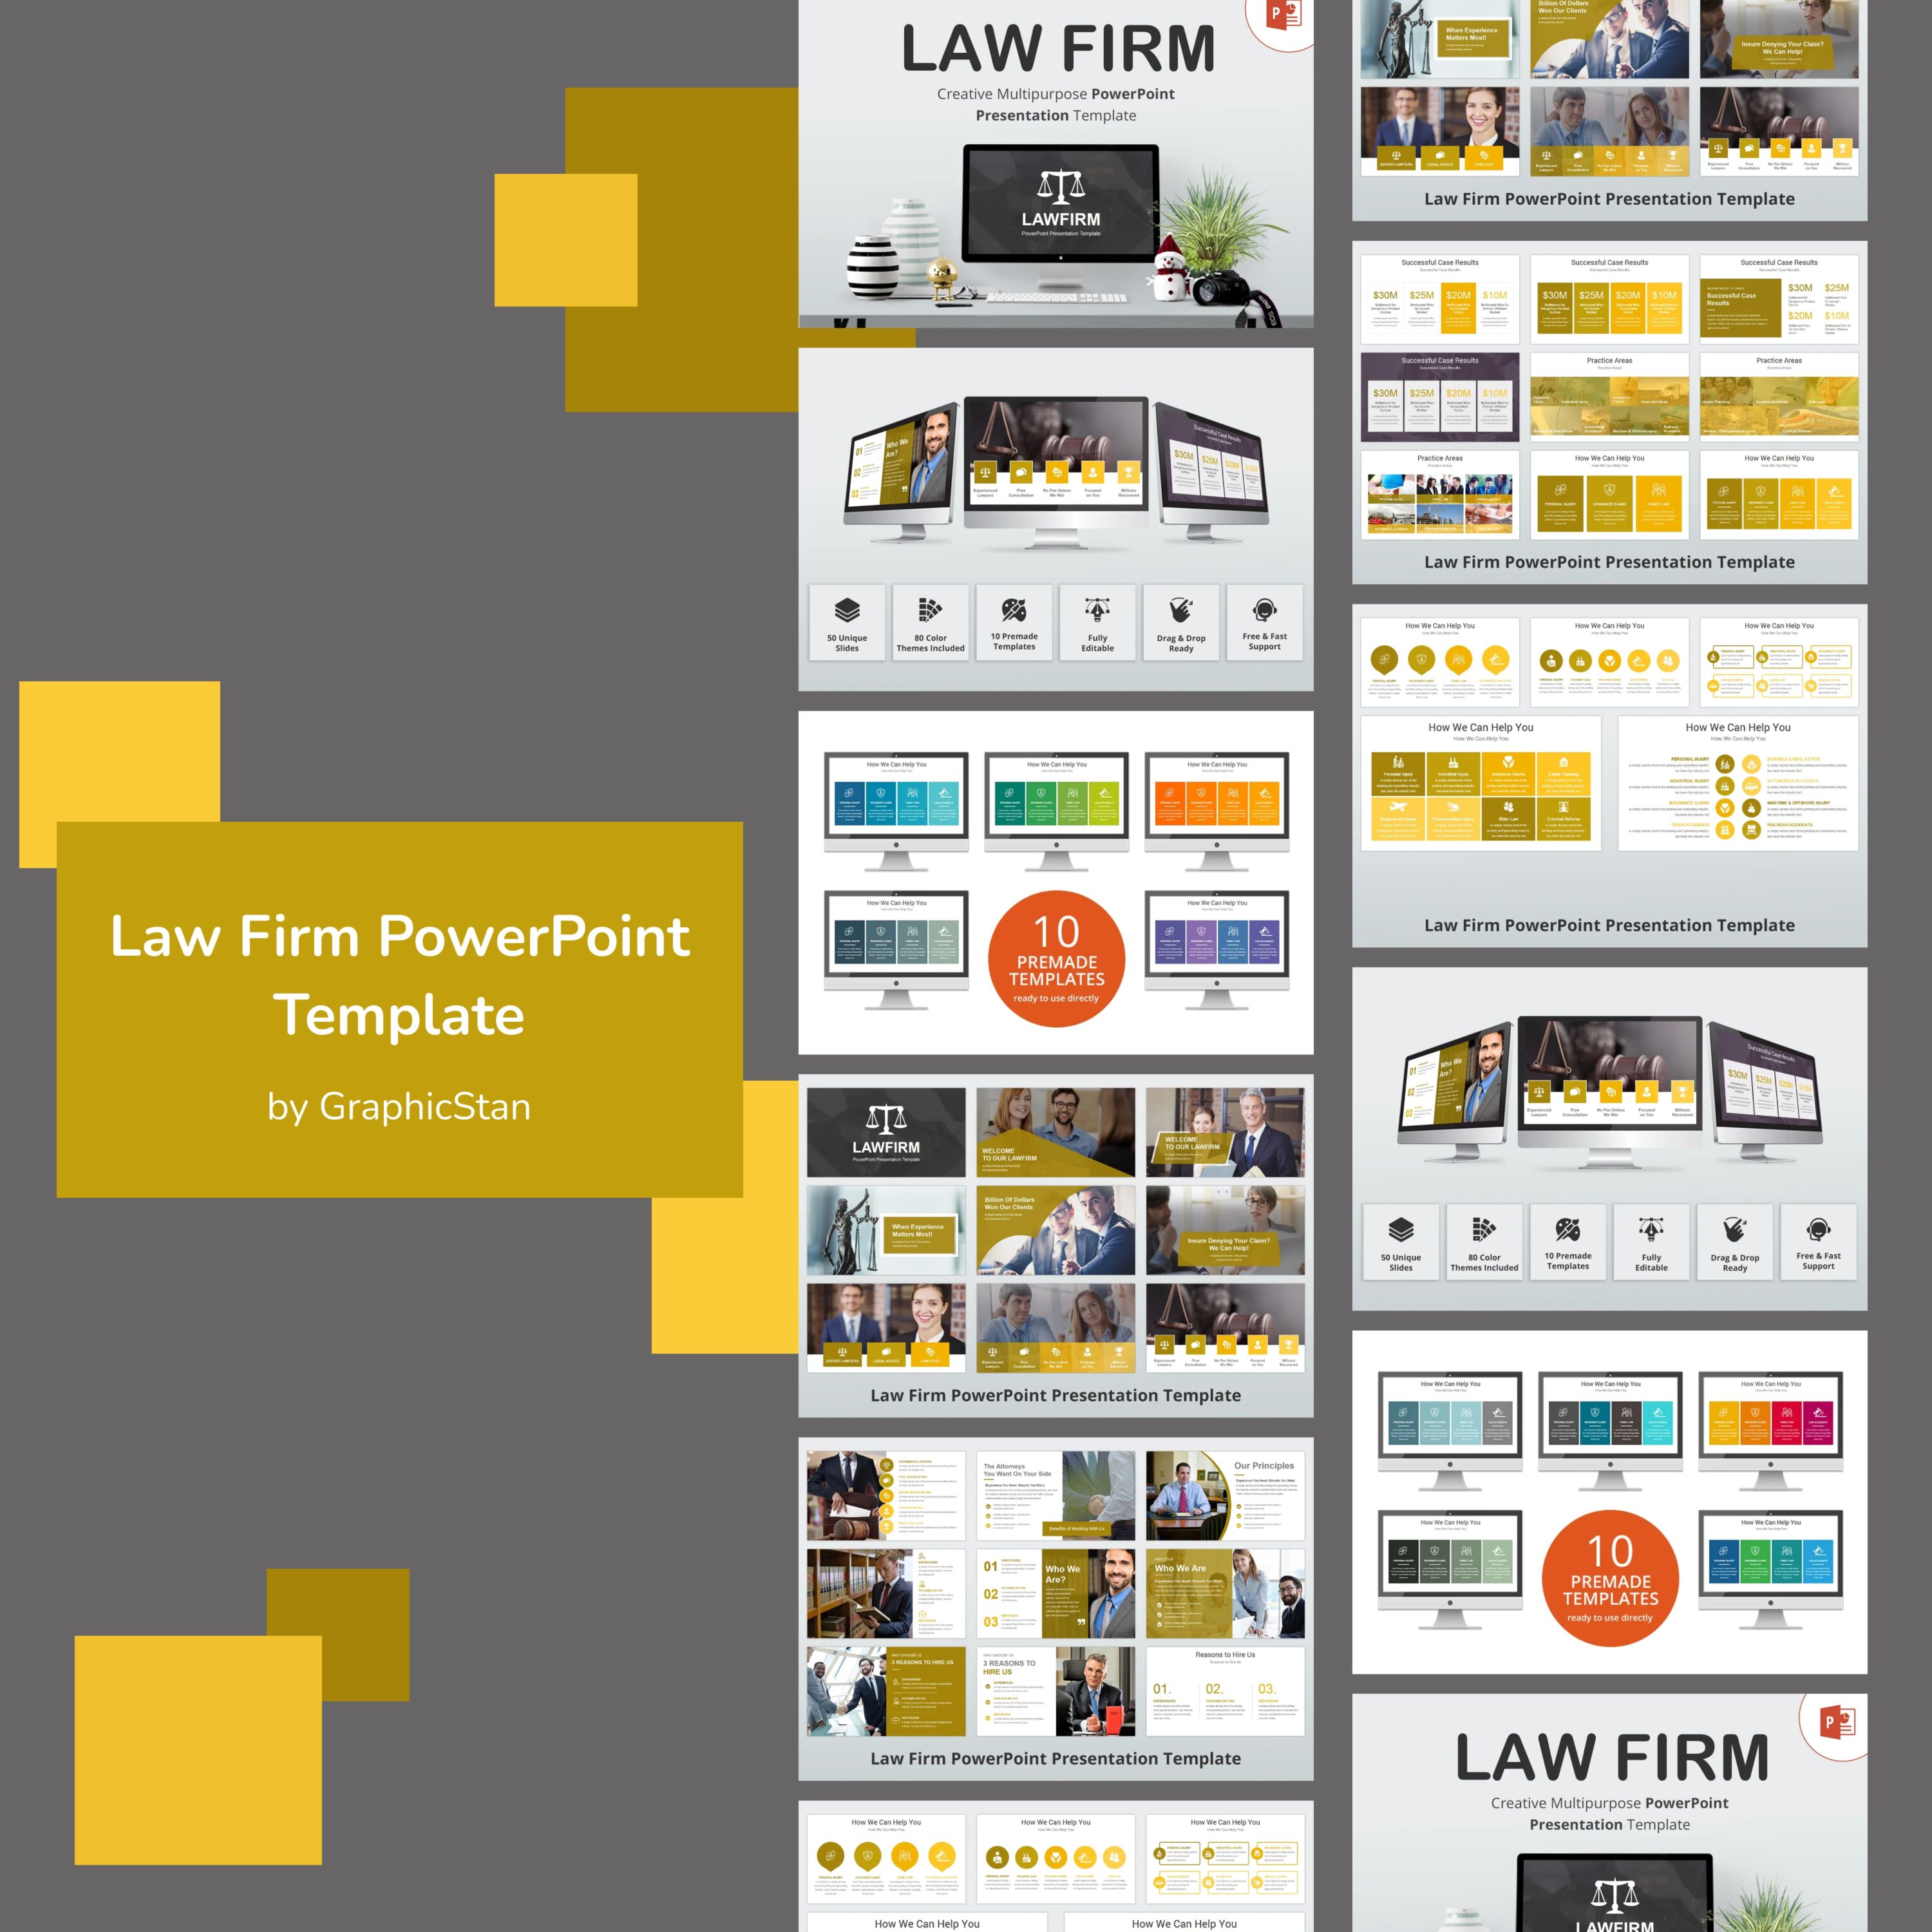 1law firm powerpoint template.